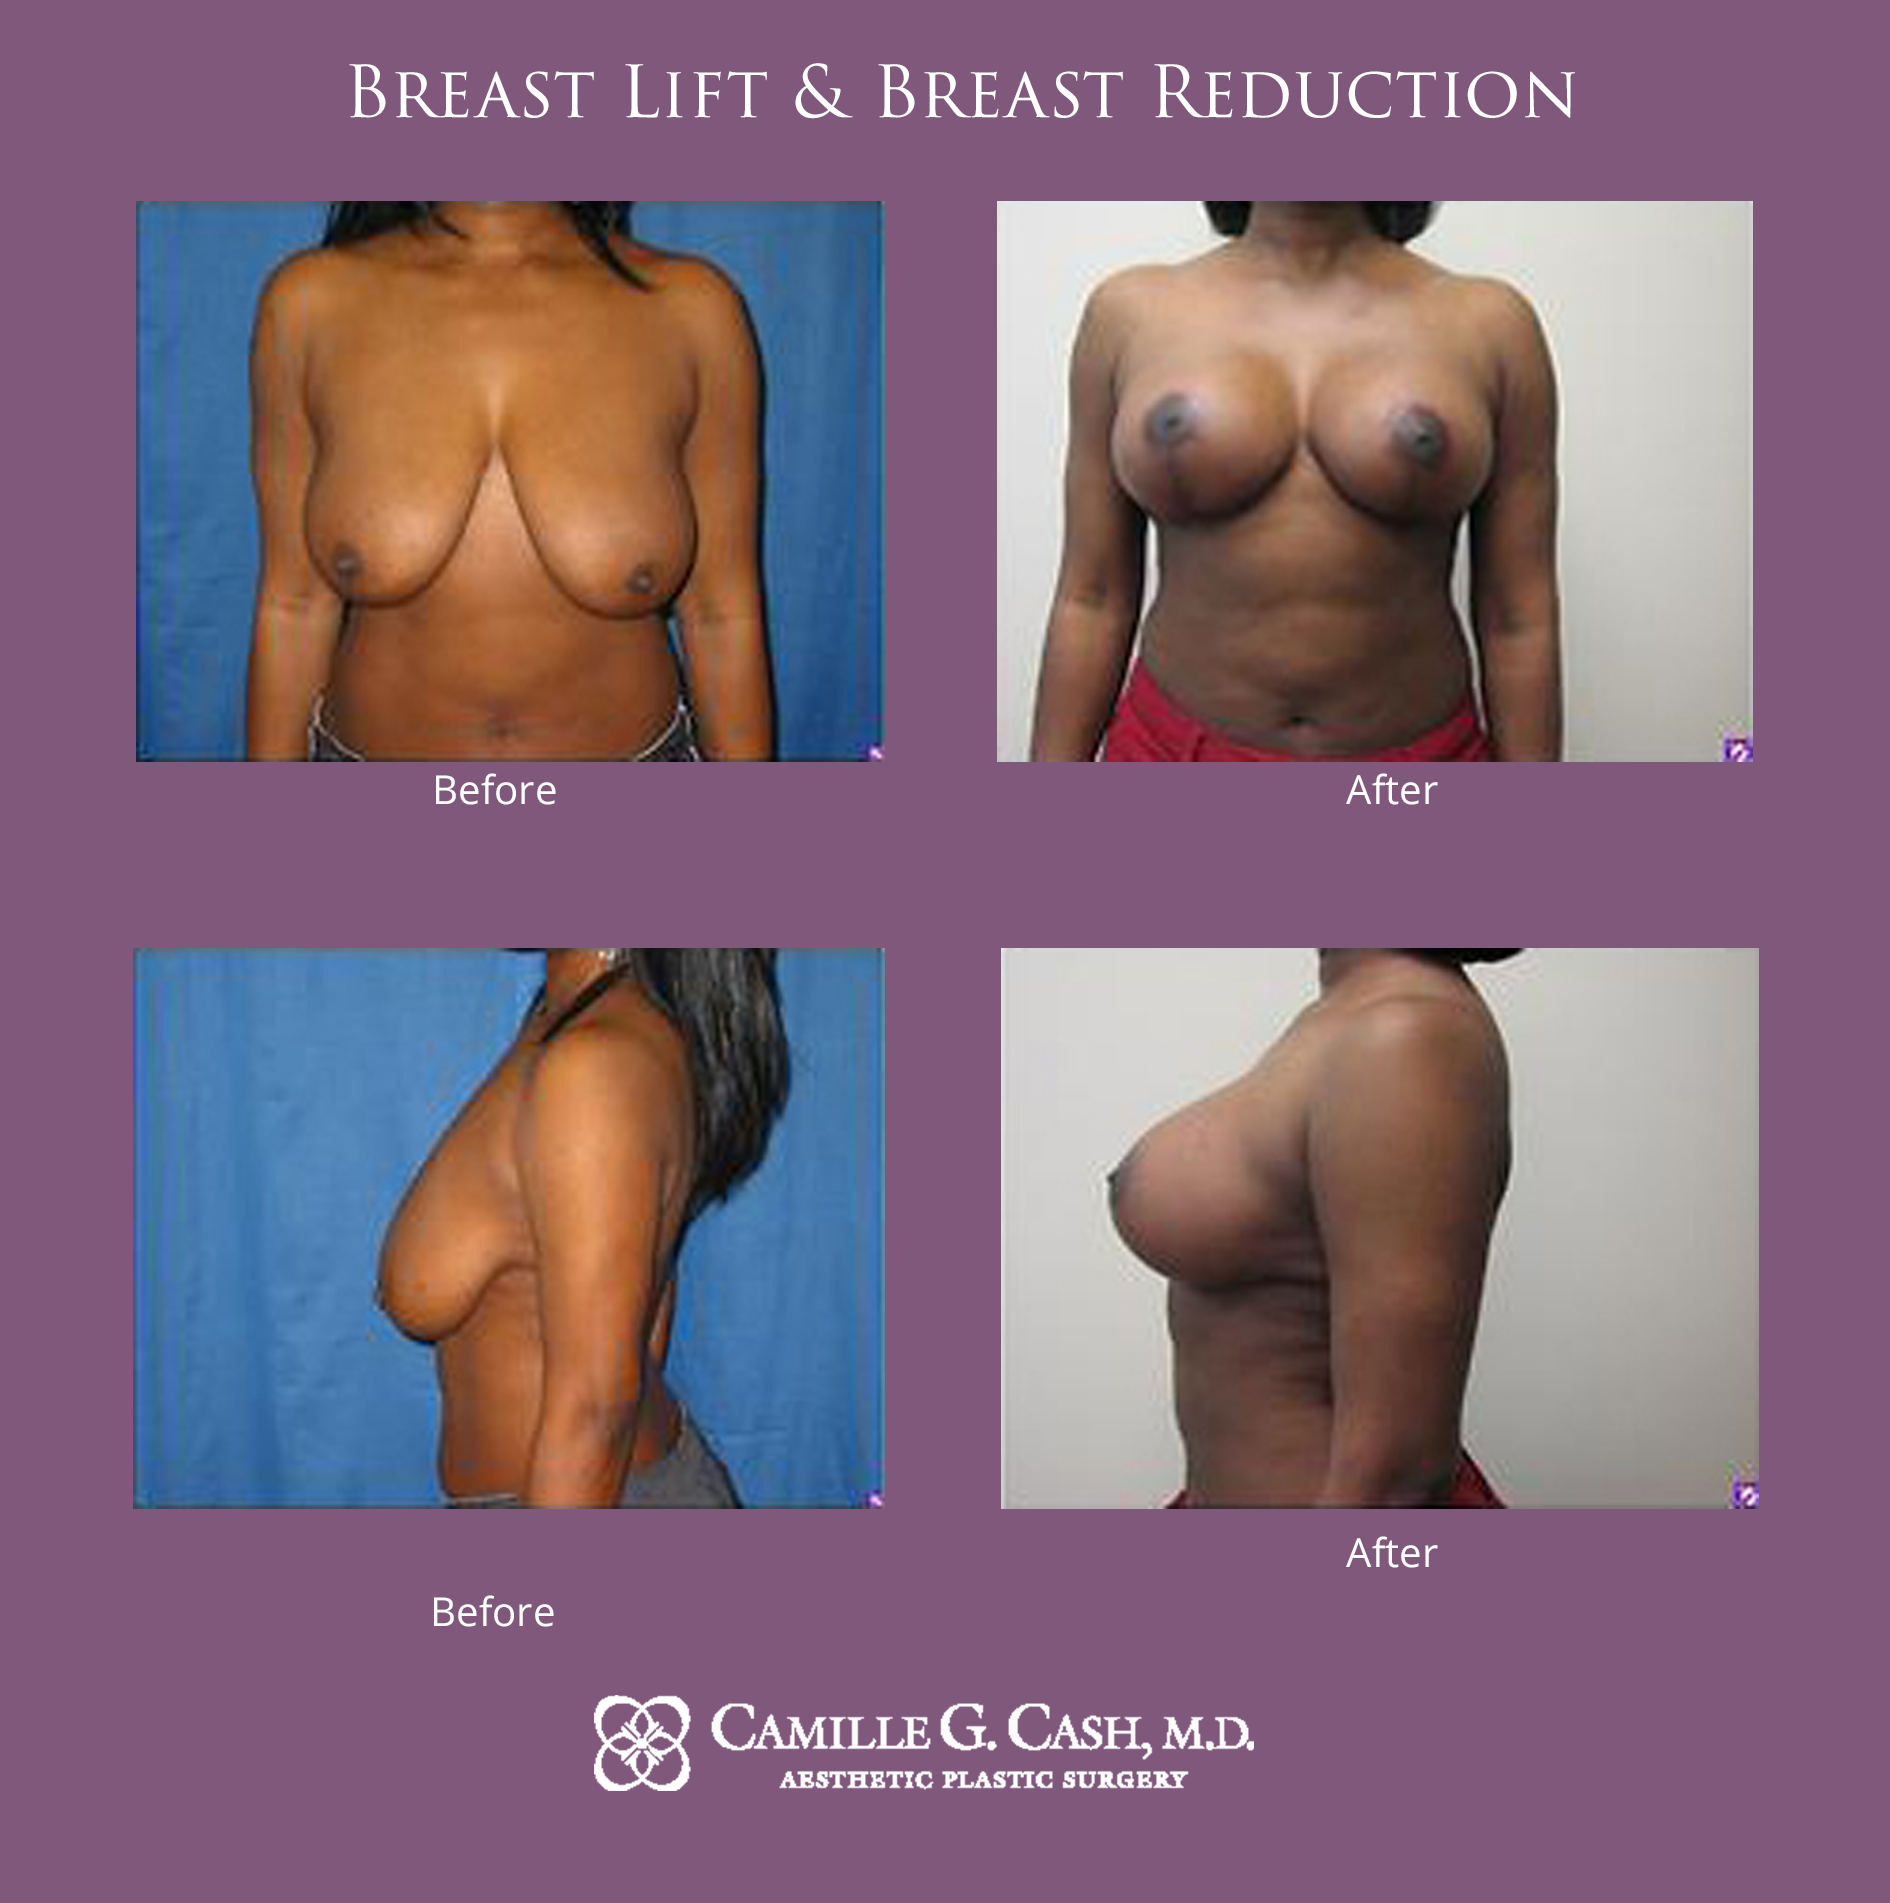 Breast lift and breast reduction before and after photos